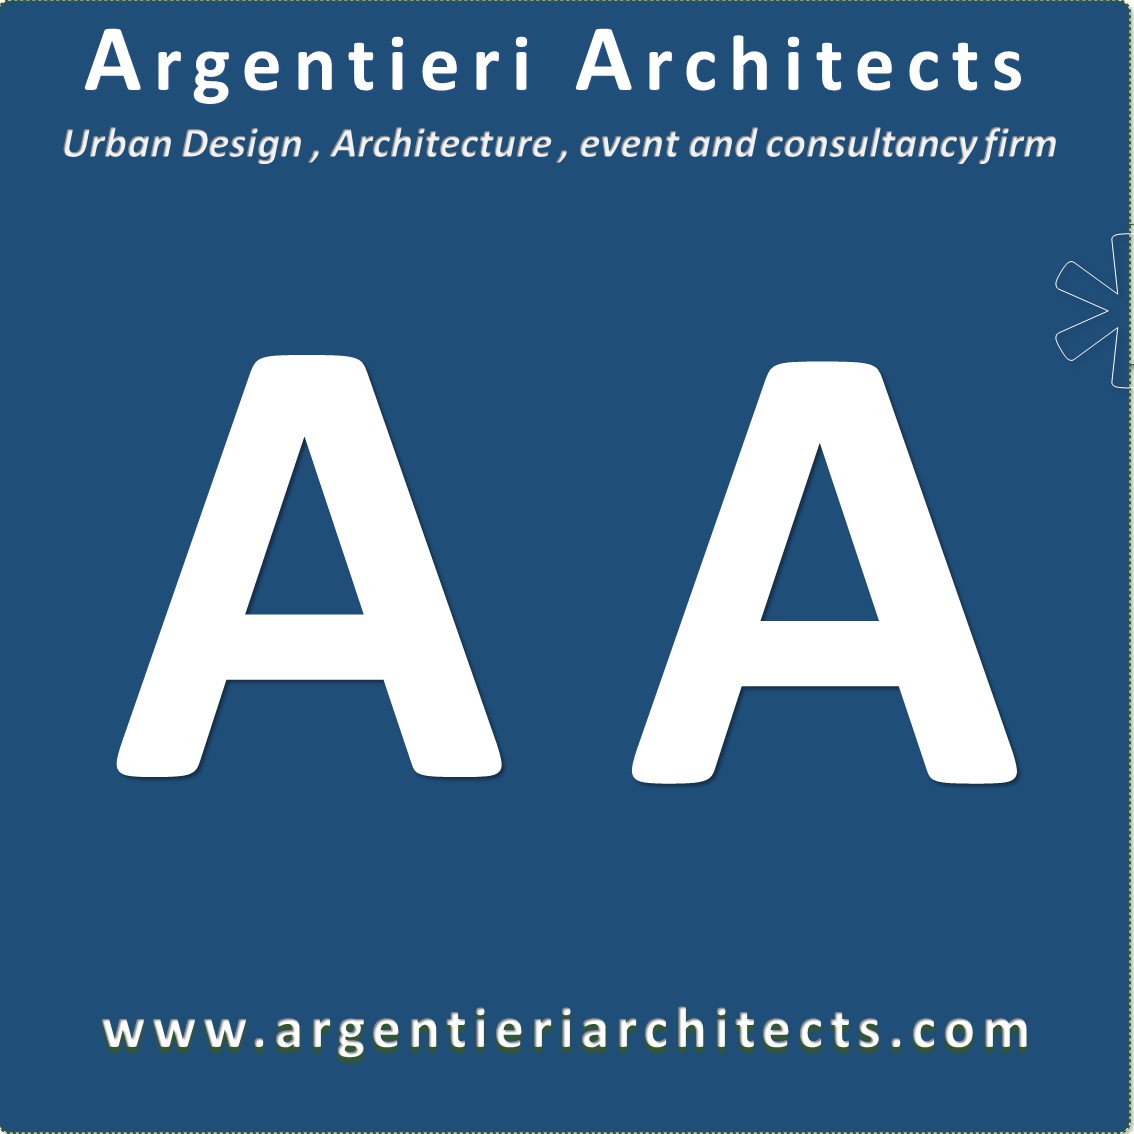 Recent news- Argentieri Architects is an innovation and design firm. International expert on urban strategies & development, Smart Cities, architecture , retail and hospitality  